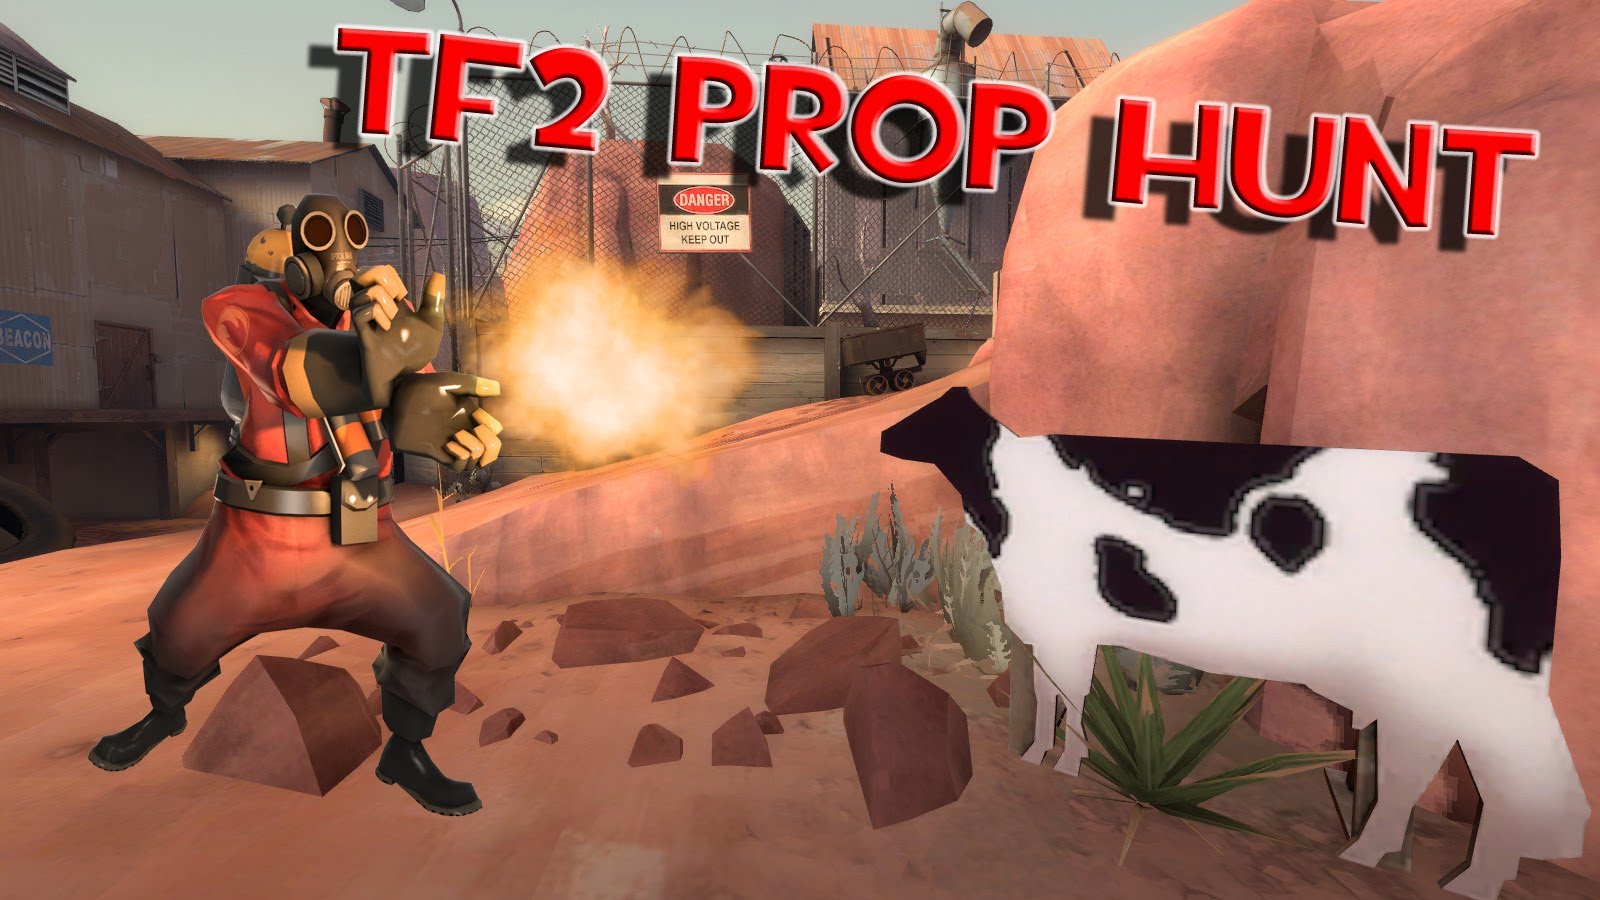 Prop hunt not on steam фото 29